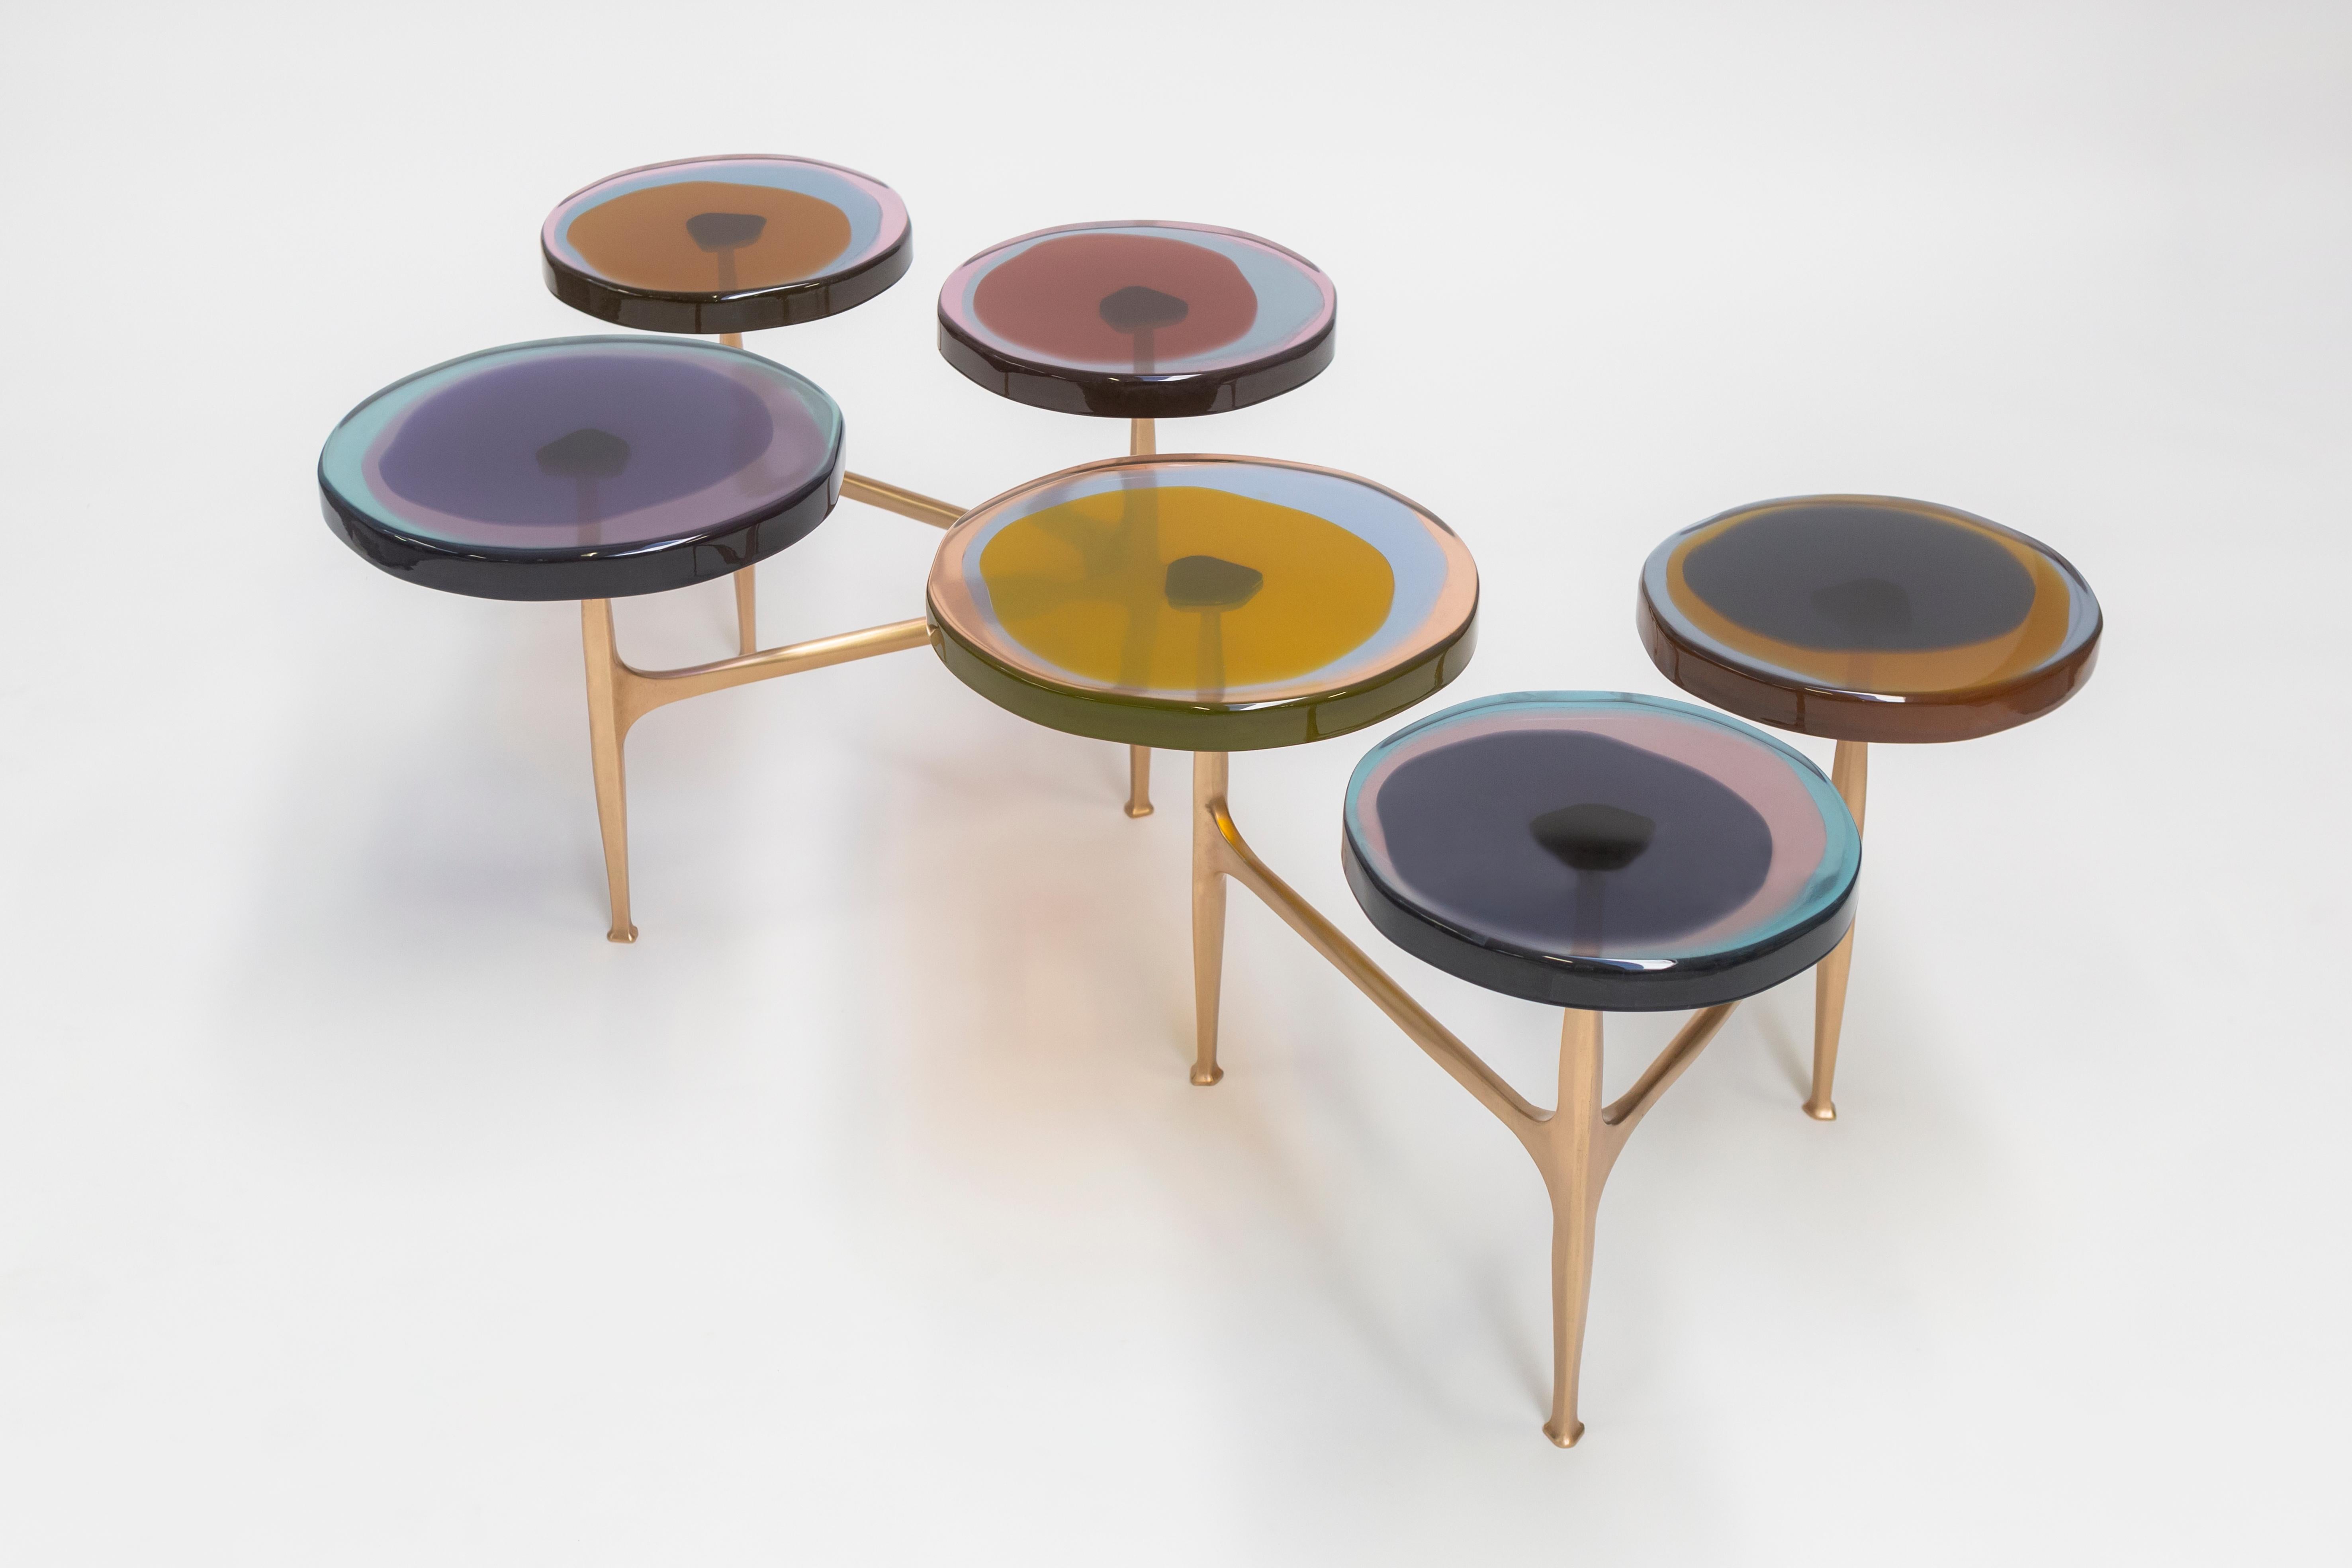 Agatha Coffe Table 3 by Draga & Aurel Resin and Bronze, 21st Century For Sale 3